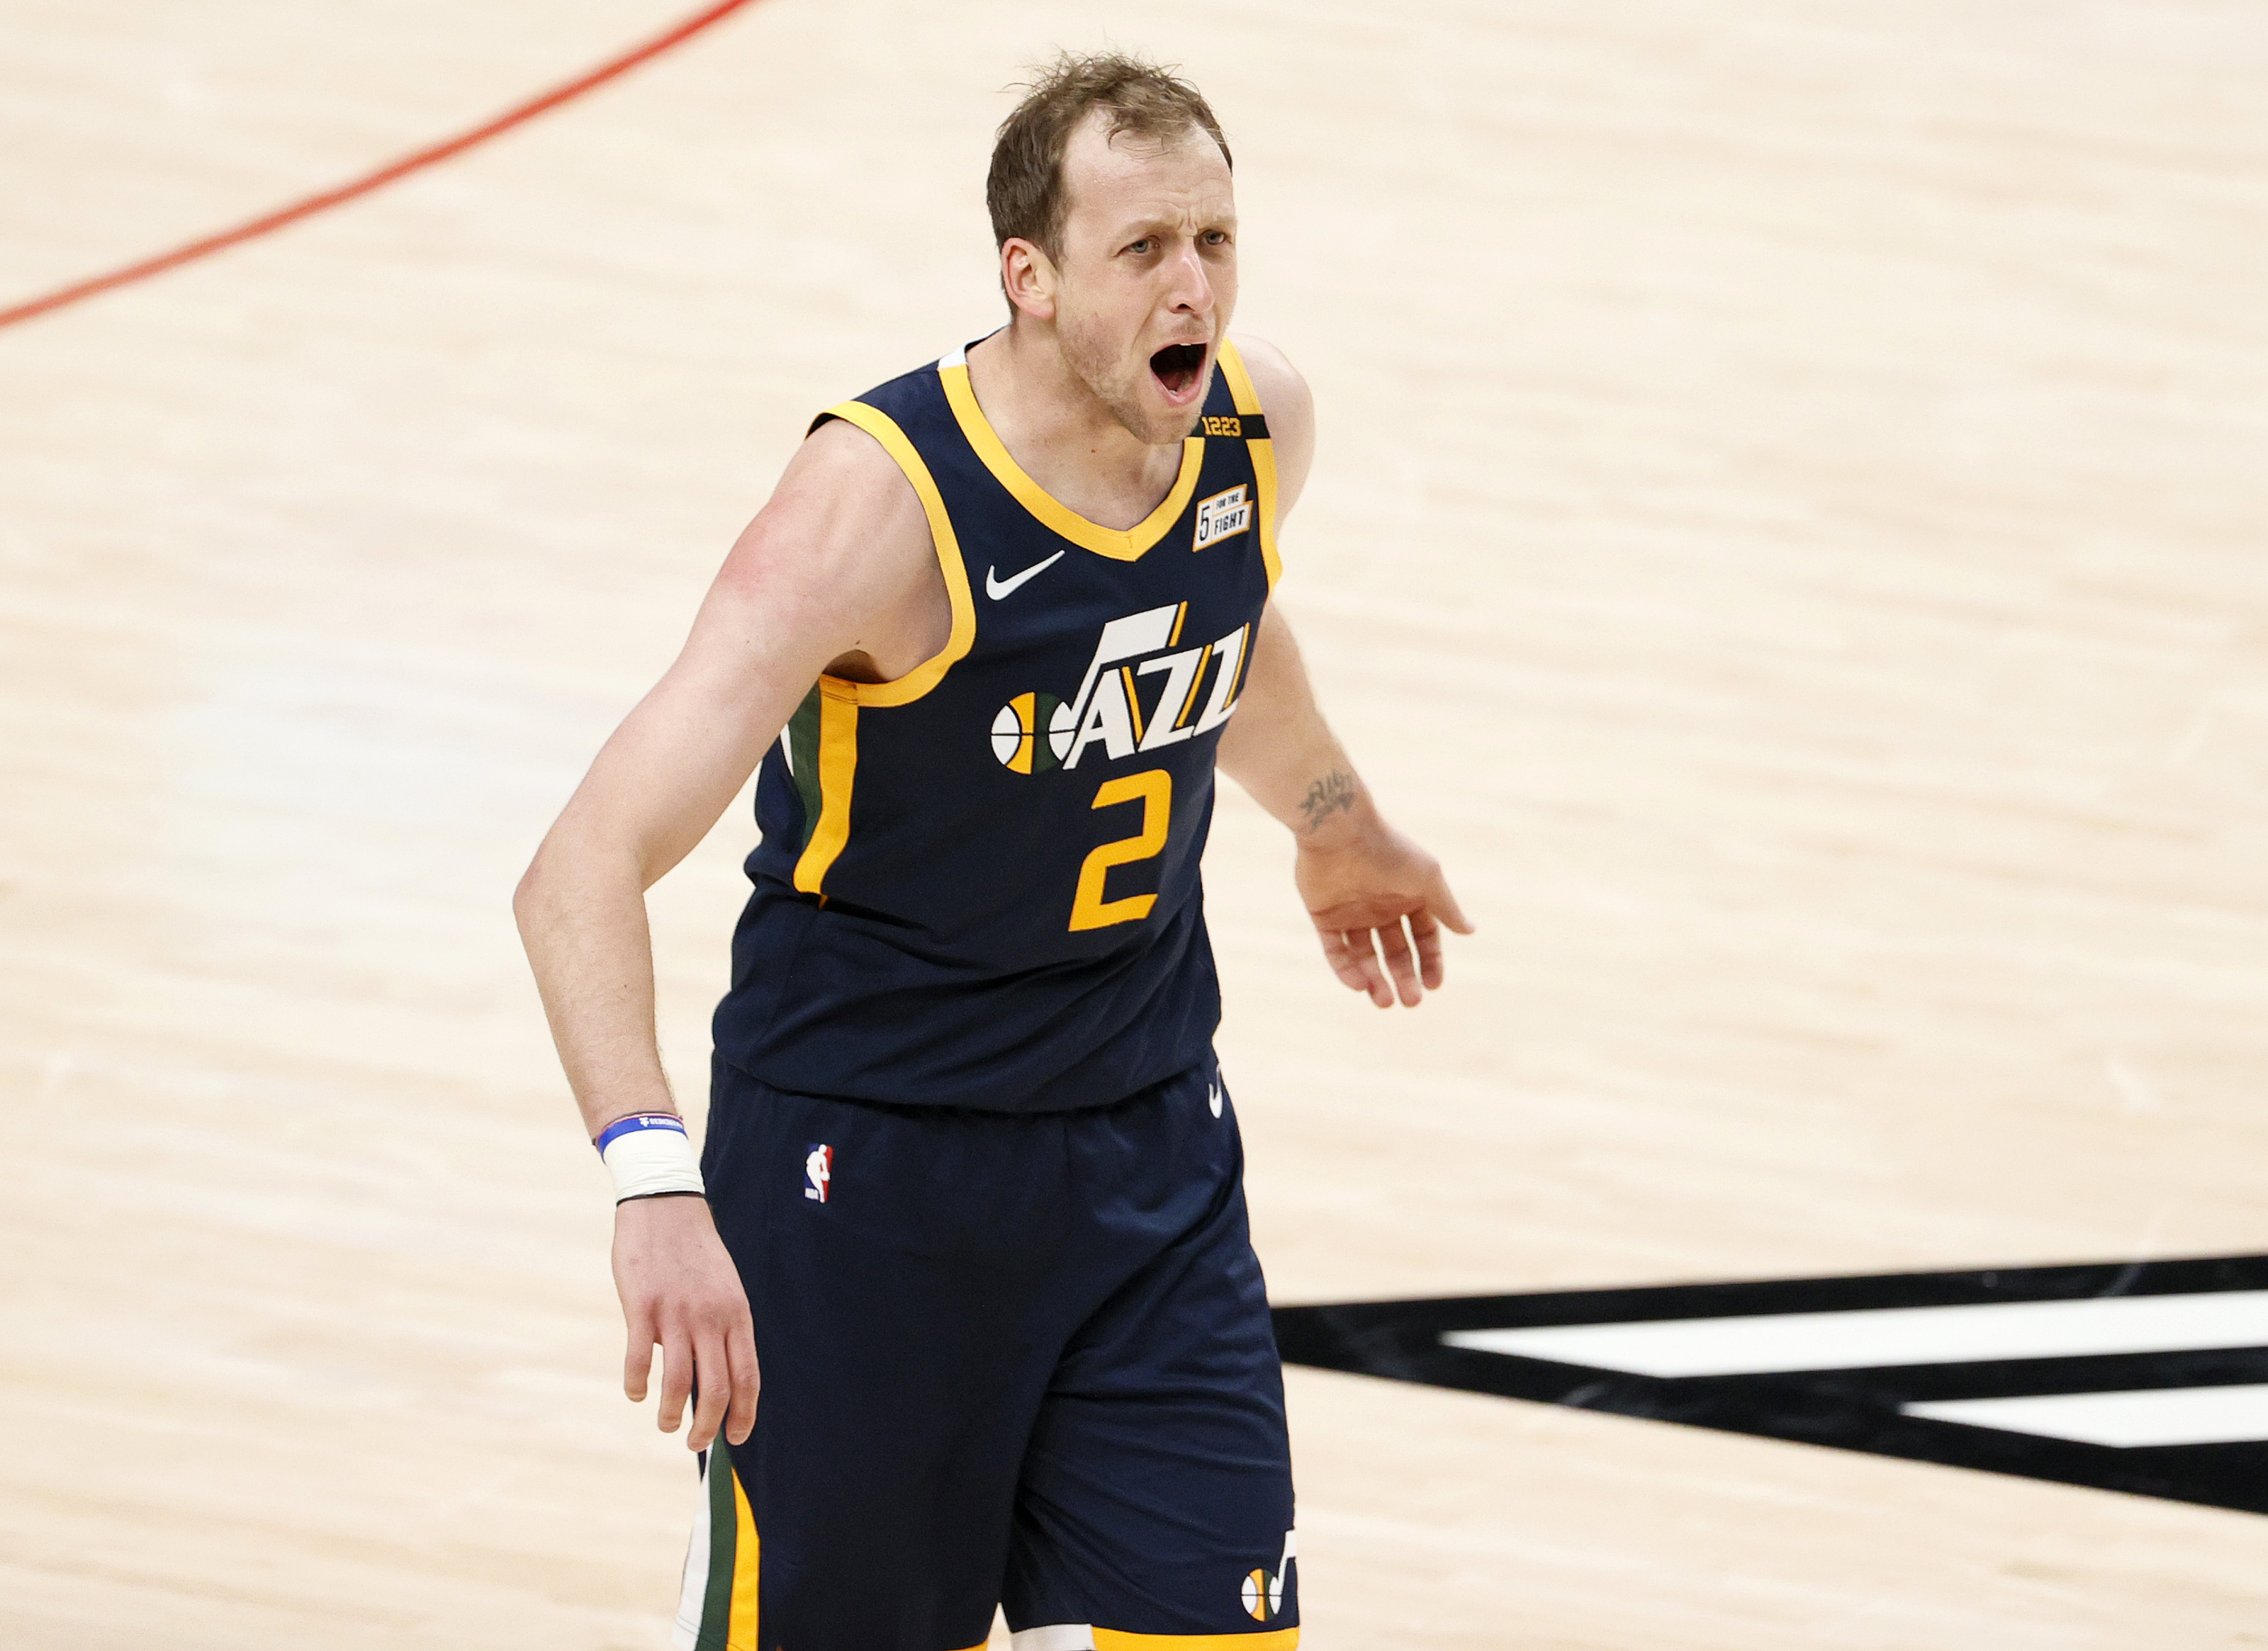 For the Utah Jazz to truly contend, Joe Ingles and Bojan